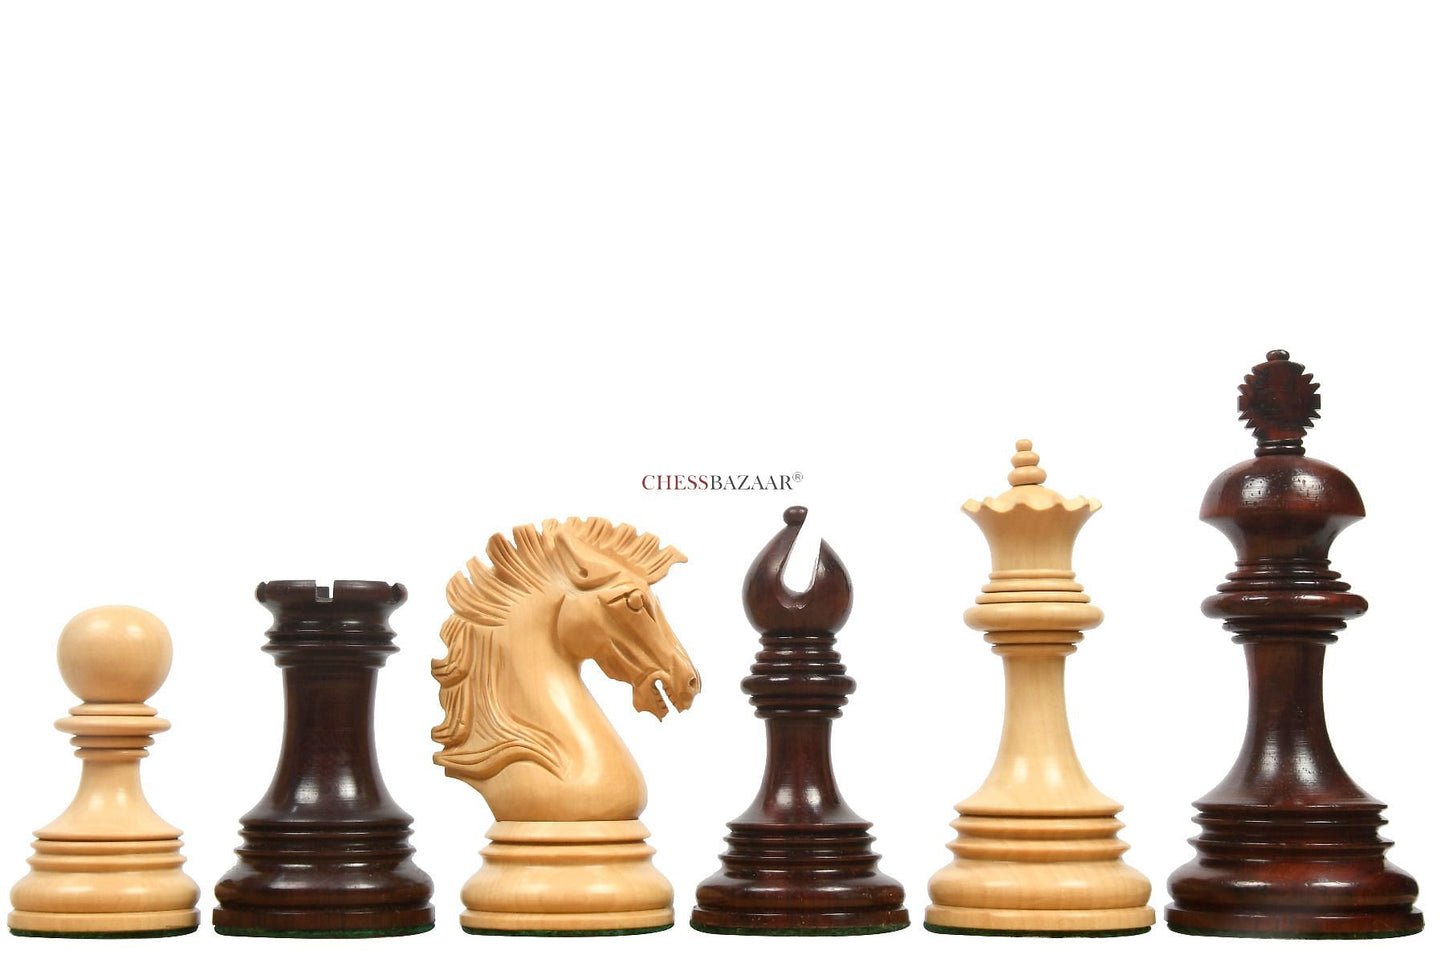 New Indian-American Luxury Series Triple Weighted Chess Pieces in Bud Rosewood(Padauk) / Box Wood Ver 2.0 - 4.4" King